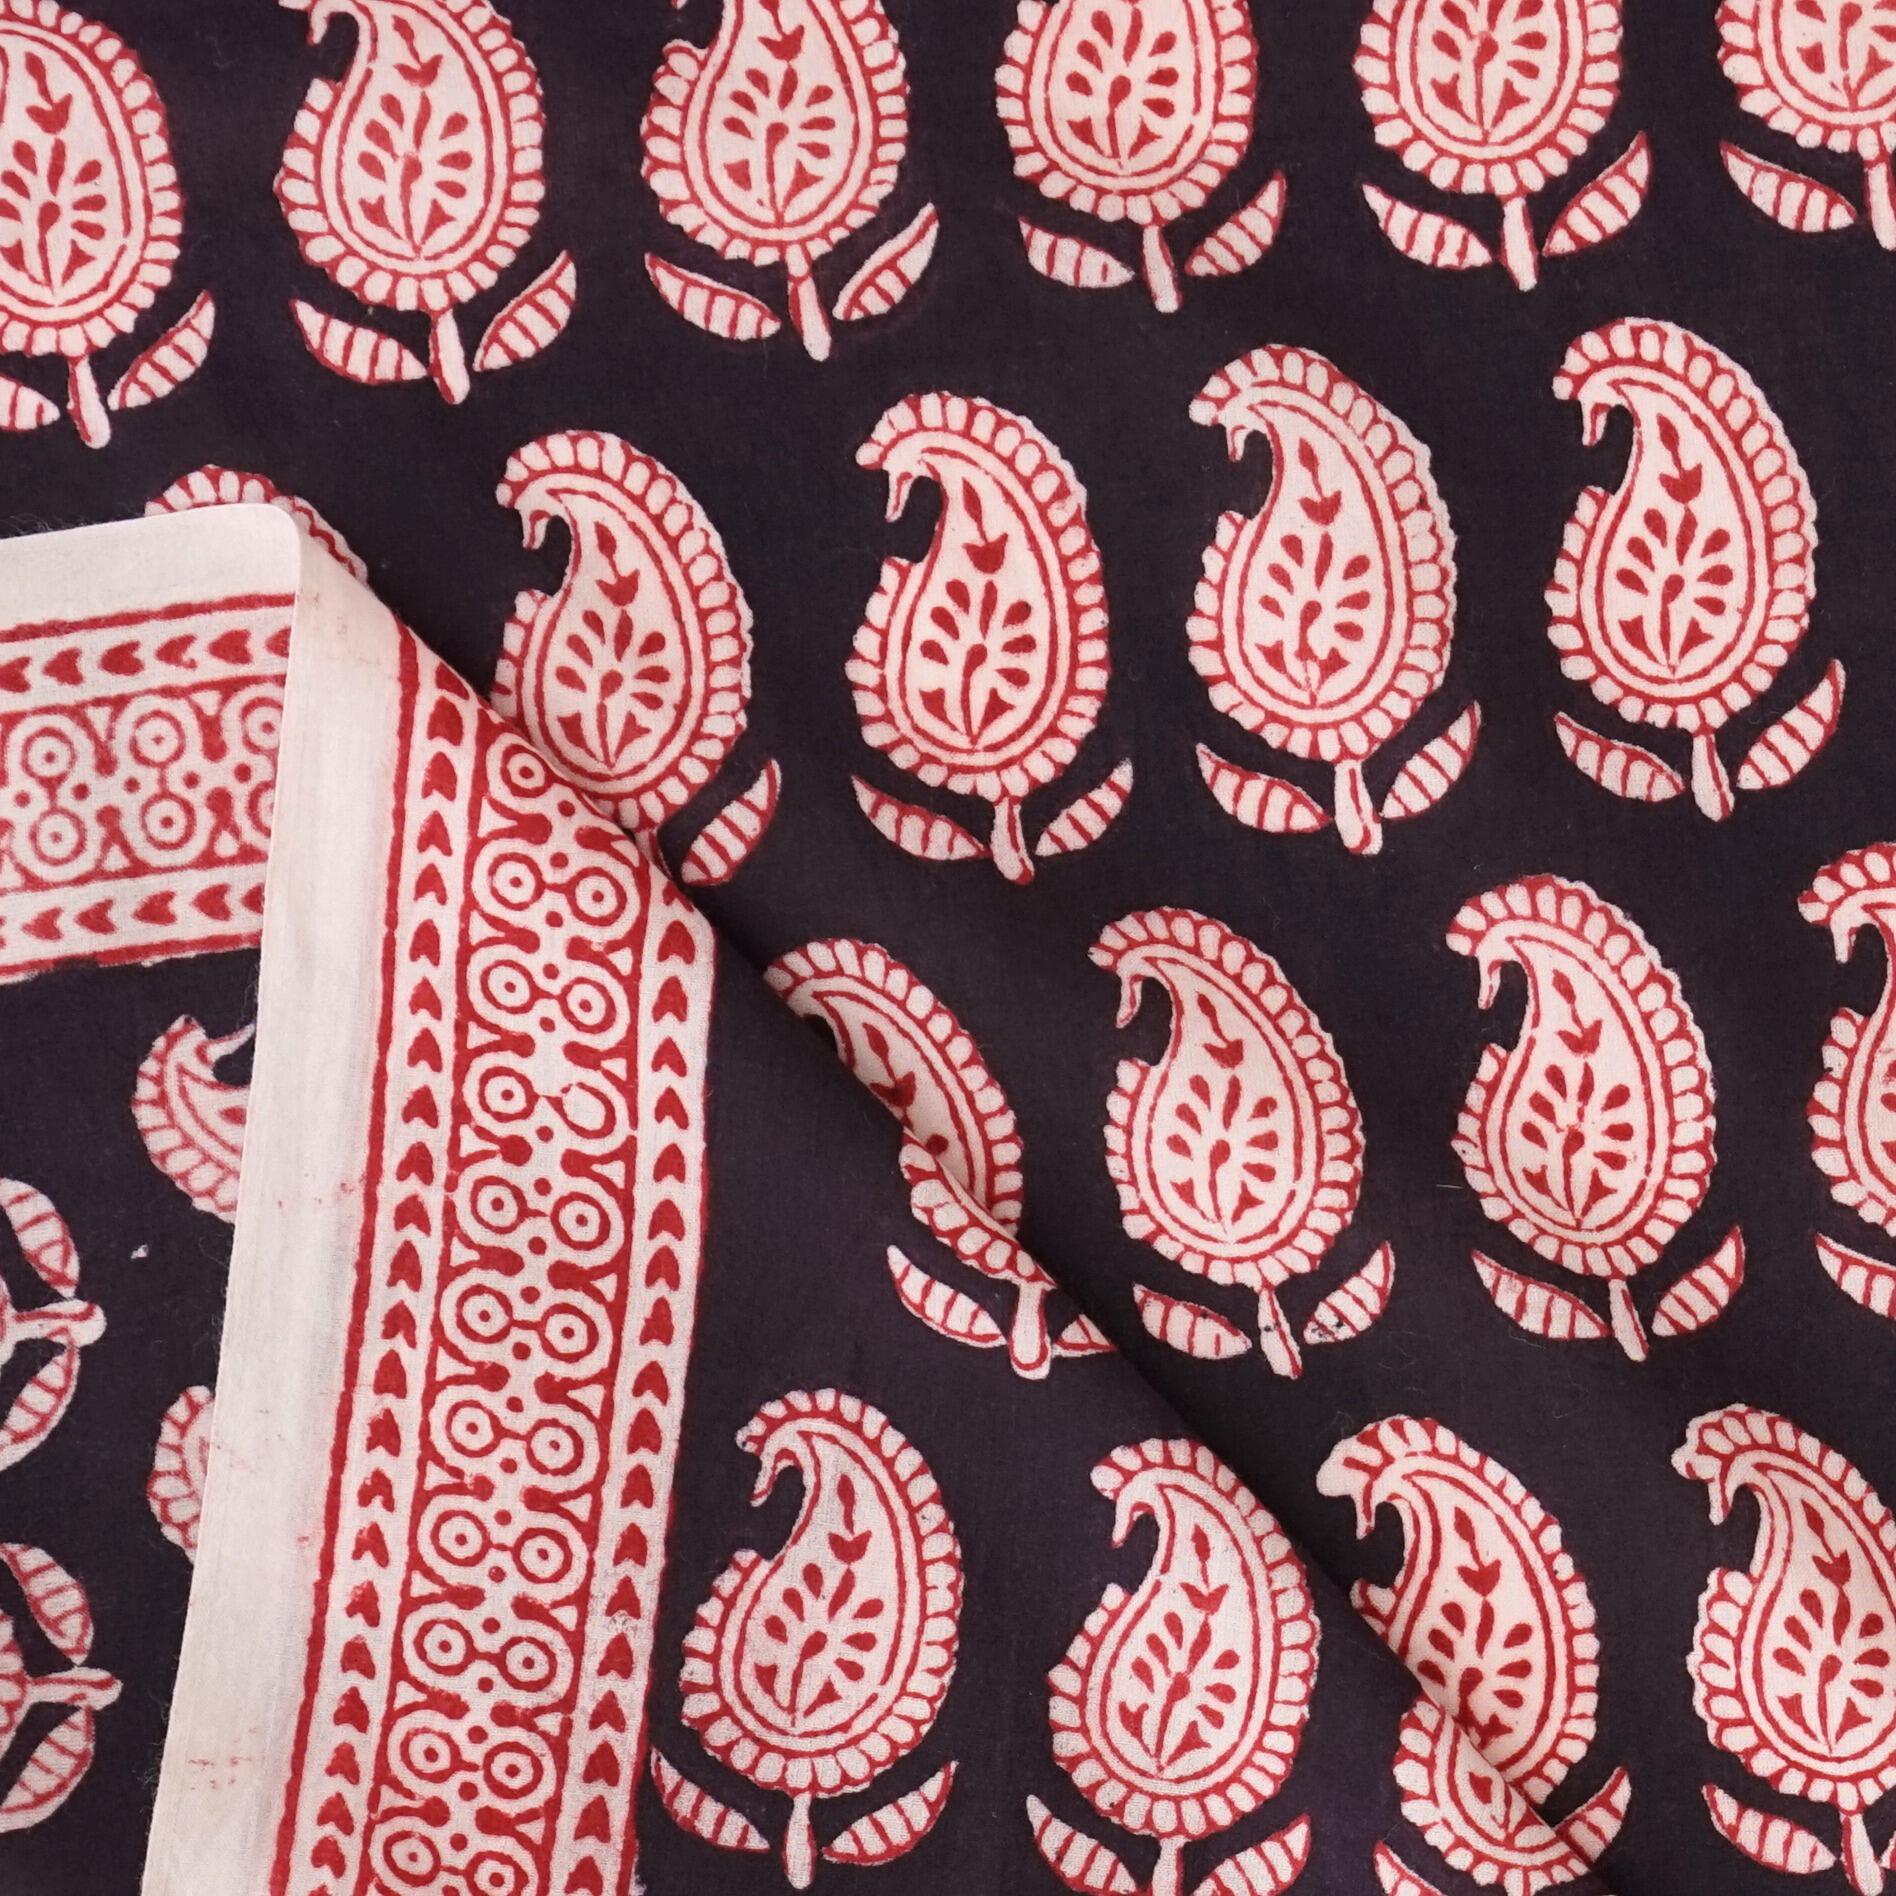 100% Block-Printed Cotton Fabric From India - Cactus Design - Iron Rust Black & Alizarin Red Dyes - Selvedge